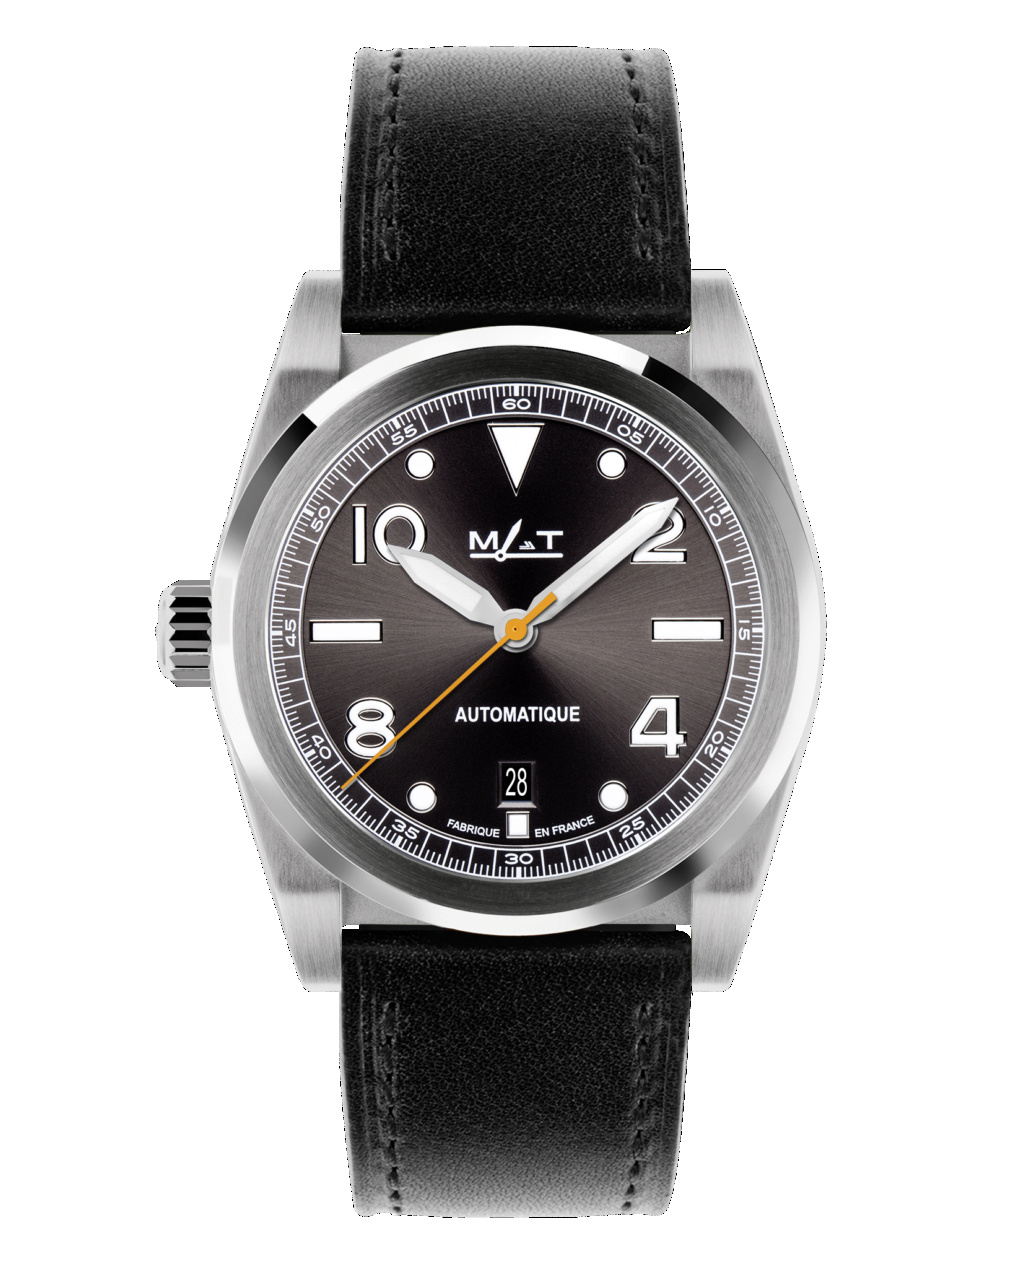 matwatches - Montres MATWATCHES - Mer Air Terre - Page 43 E6989c10